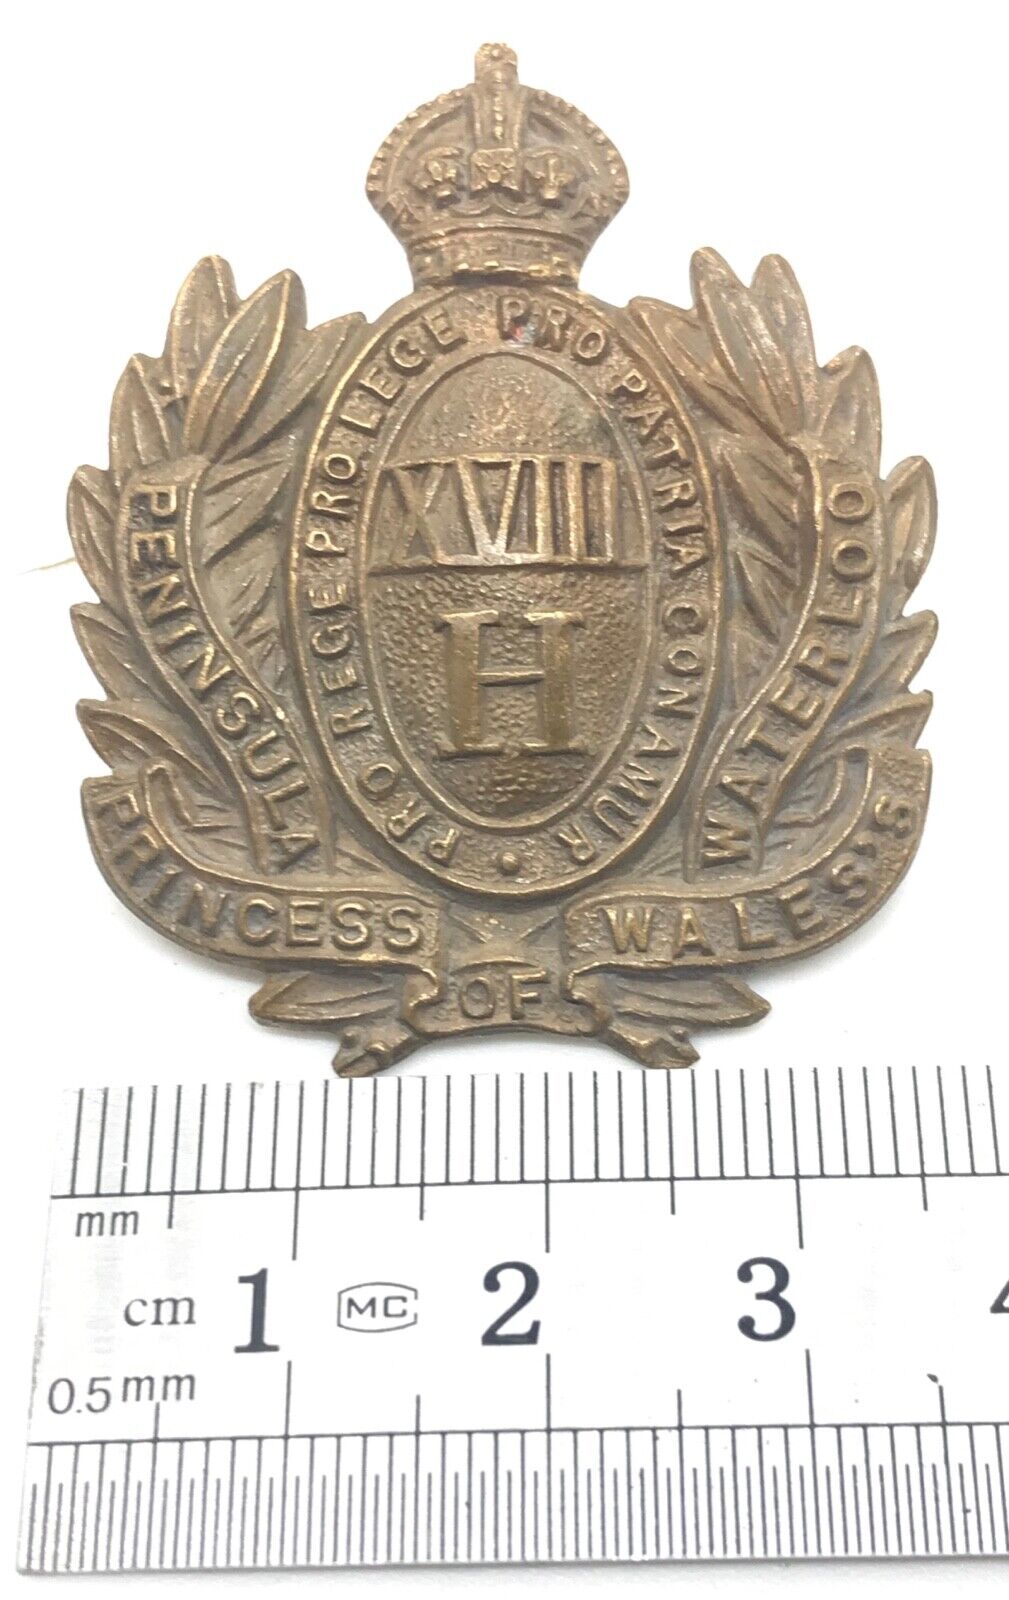 A very clean PRINCESS OF WALES 18th HUSSARS cap badge with rear lugs  B31